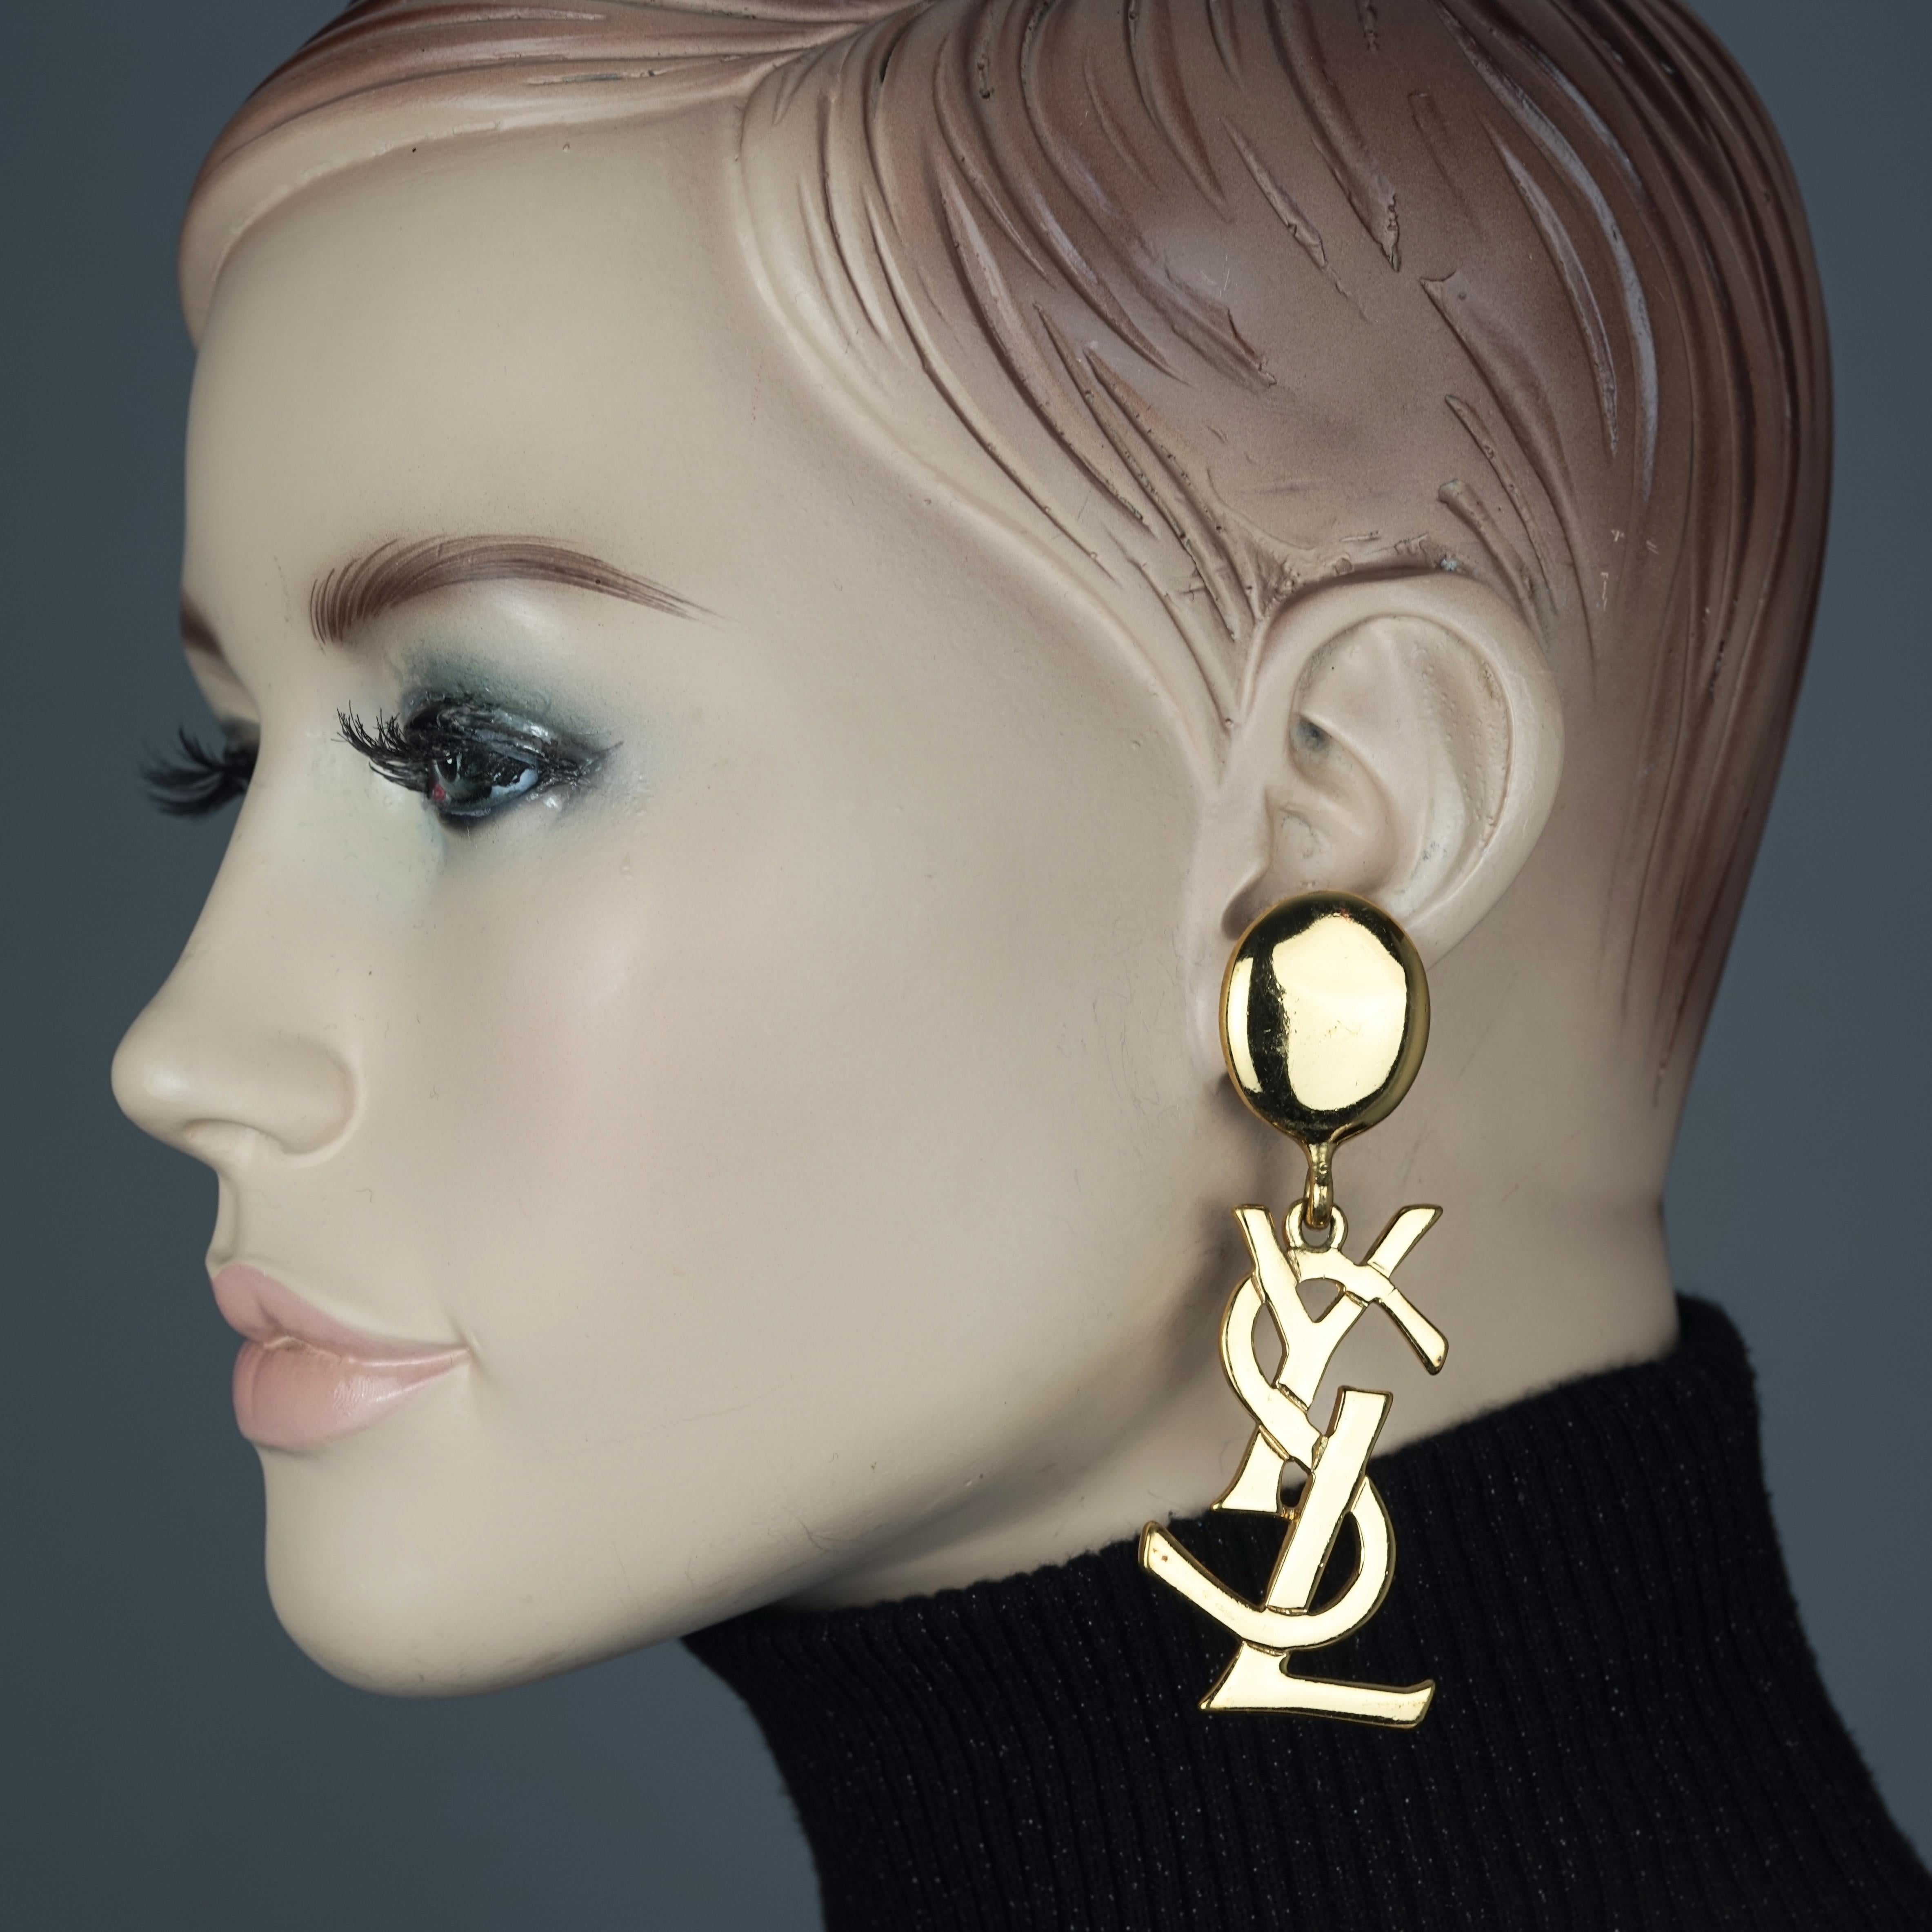 Vintage YVES SAINT LAURENT Ysl Iconic Logo Drop Earrings - Sex and The City
As seen on Samantha Jones (Kim Cattrall) in Sex and the City movie.

Measurements:
Height: 3.34 inches (8.5 cm)
Width: 1.37 inches (3.5 cm)
Weight per Earring: 17